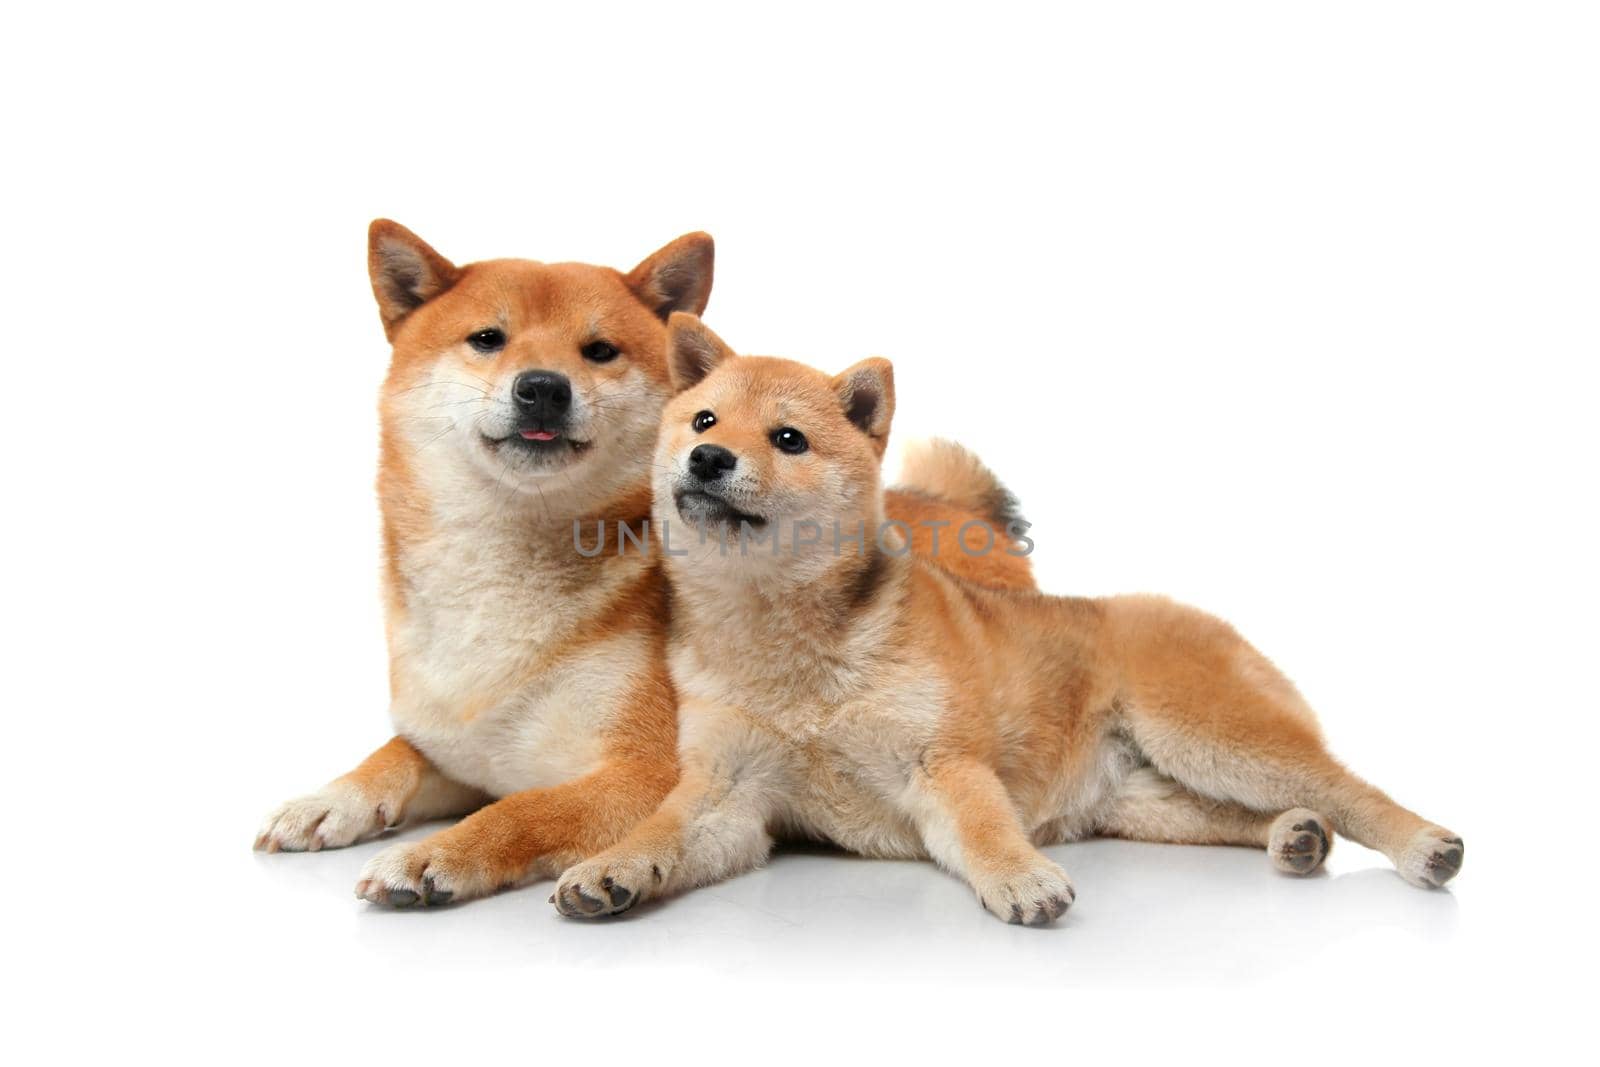 Two shiba inu dogs on white by RosaJay